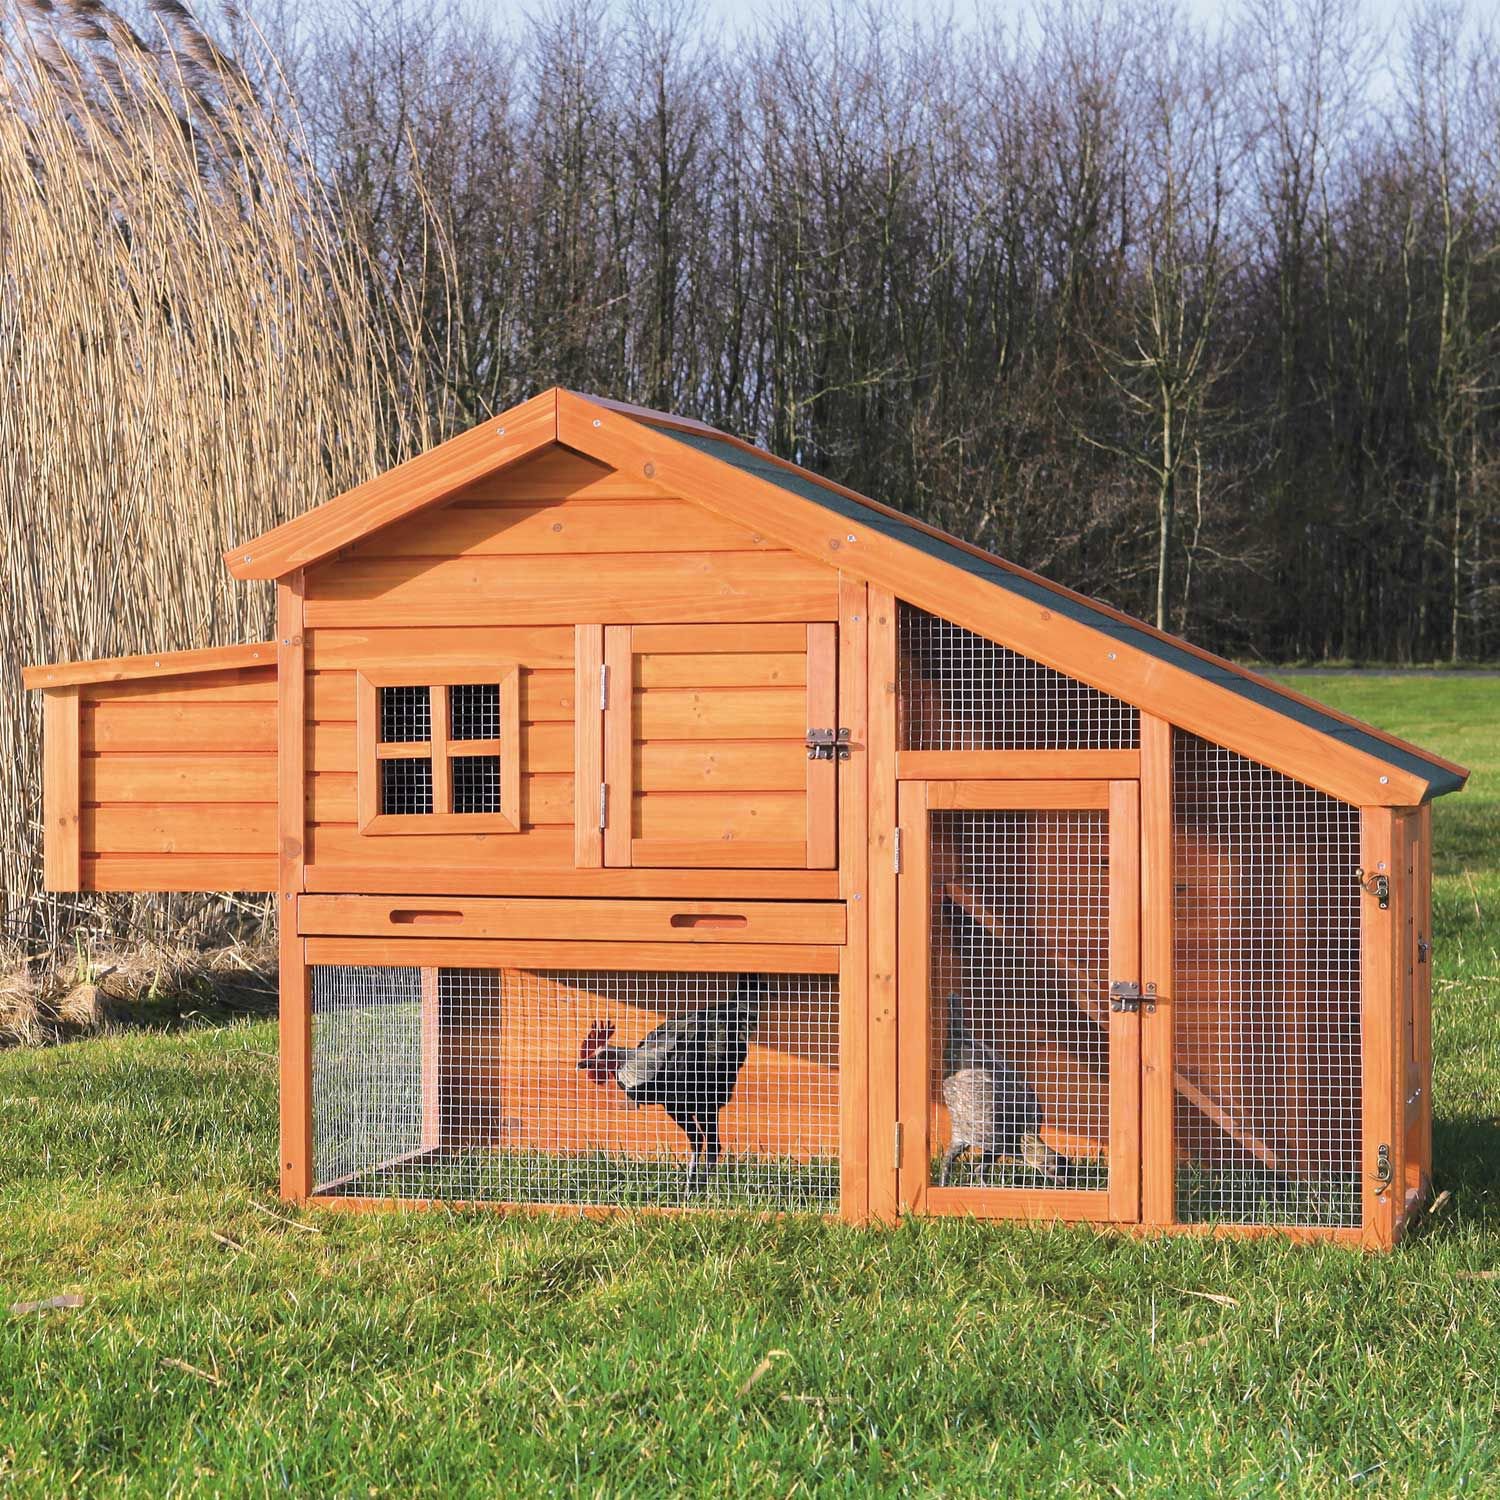 Chicken Coops for Sale: Chicken Runs, Houses &amp; Kits | Petco